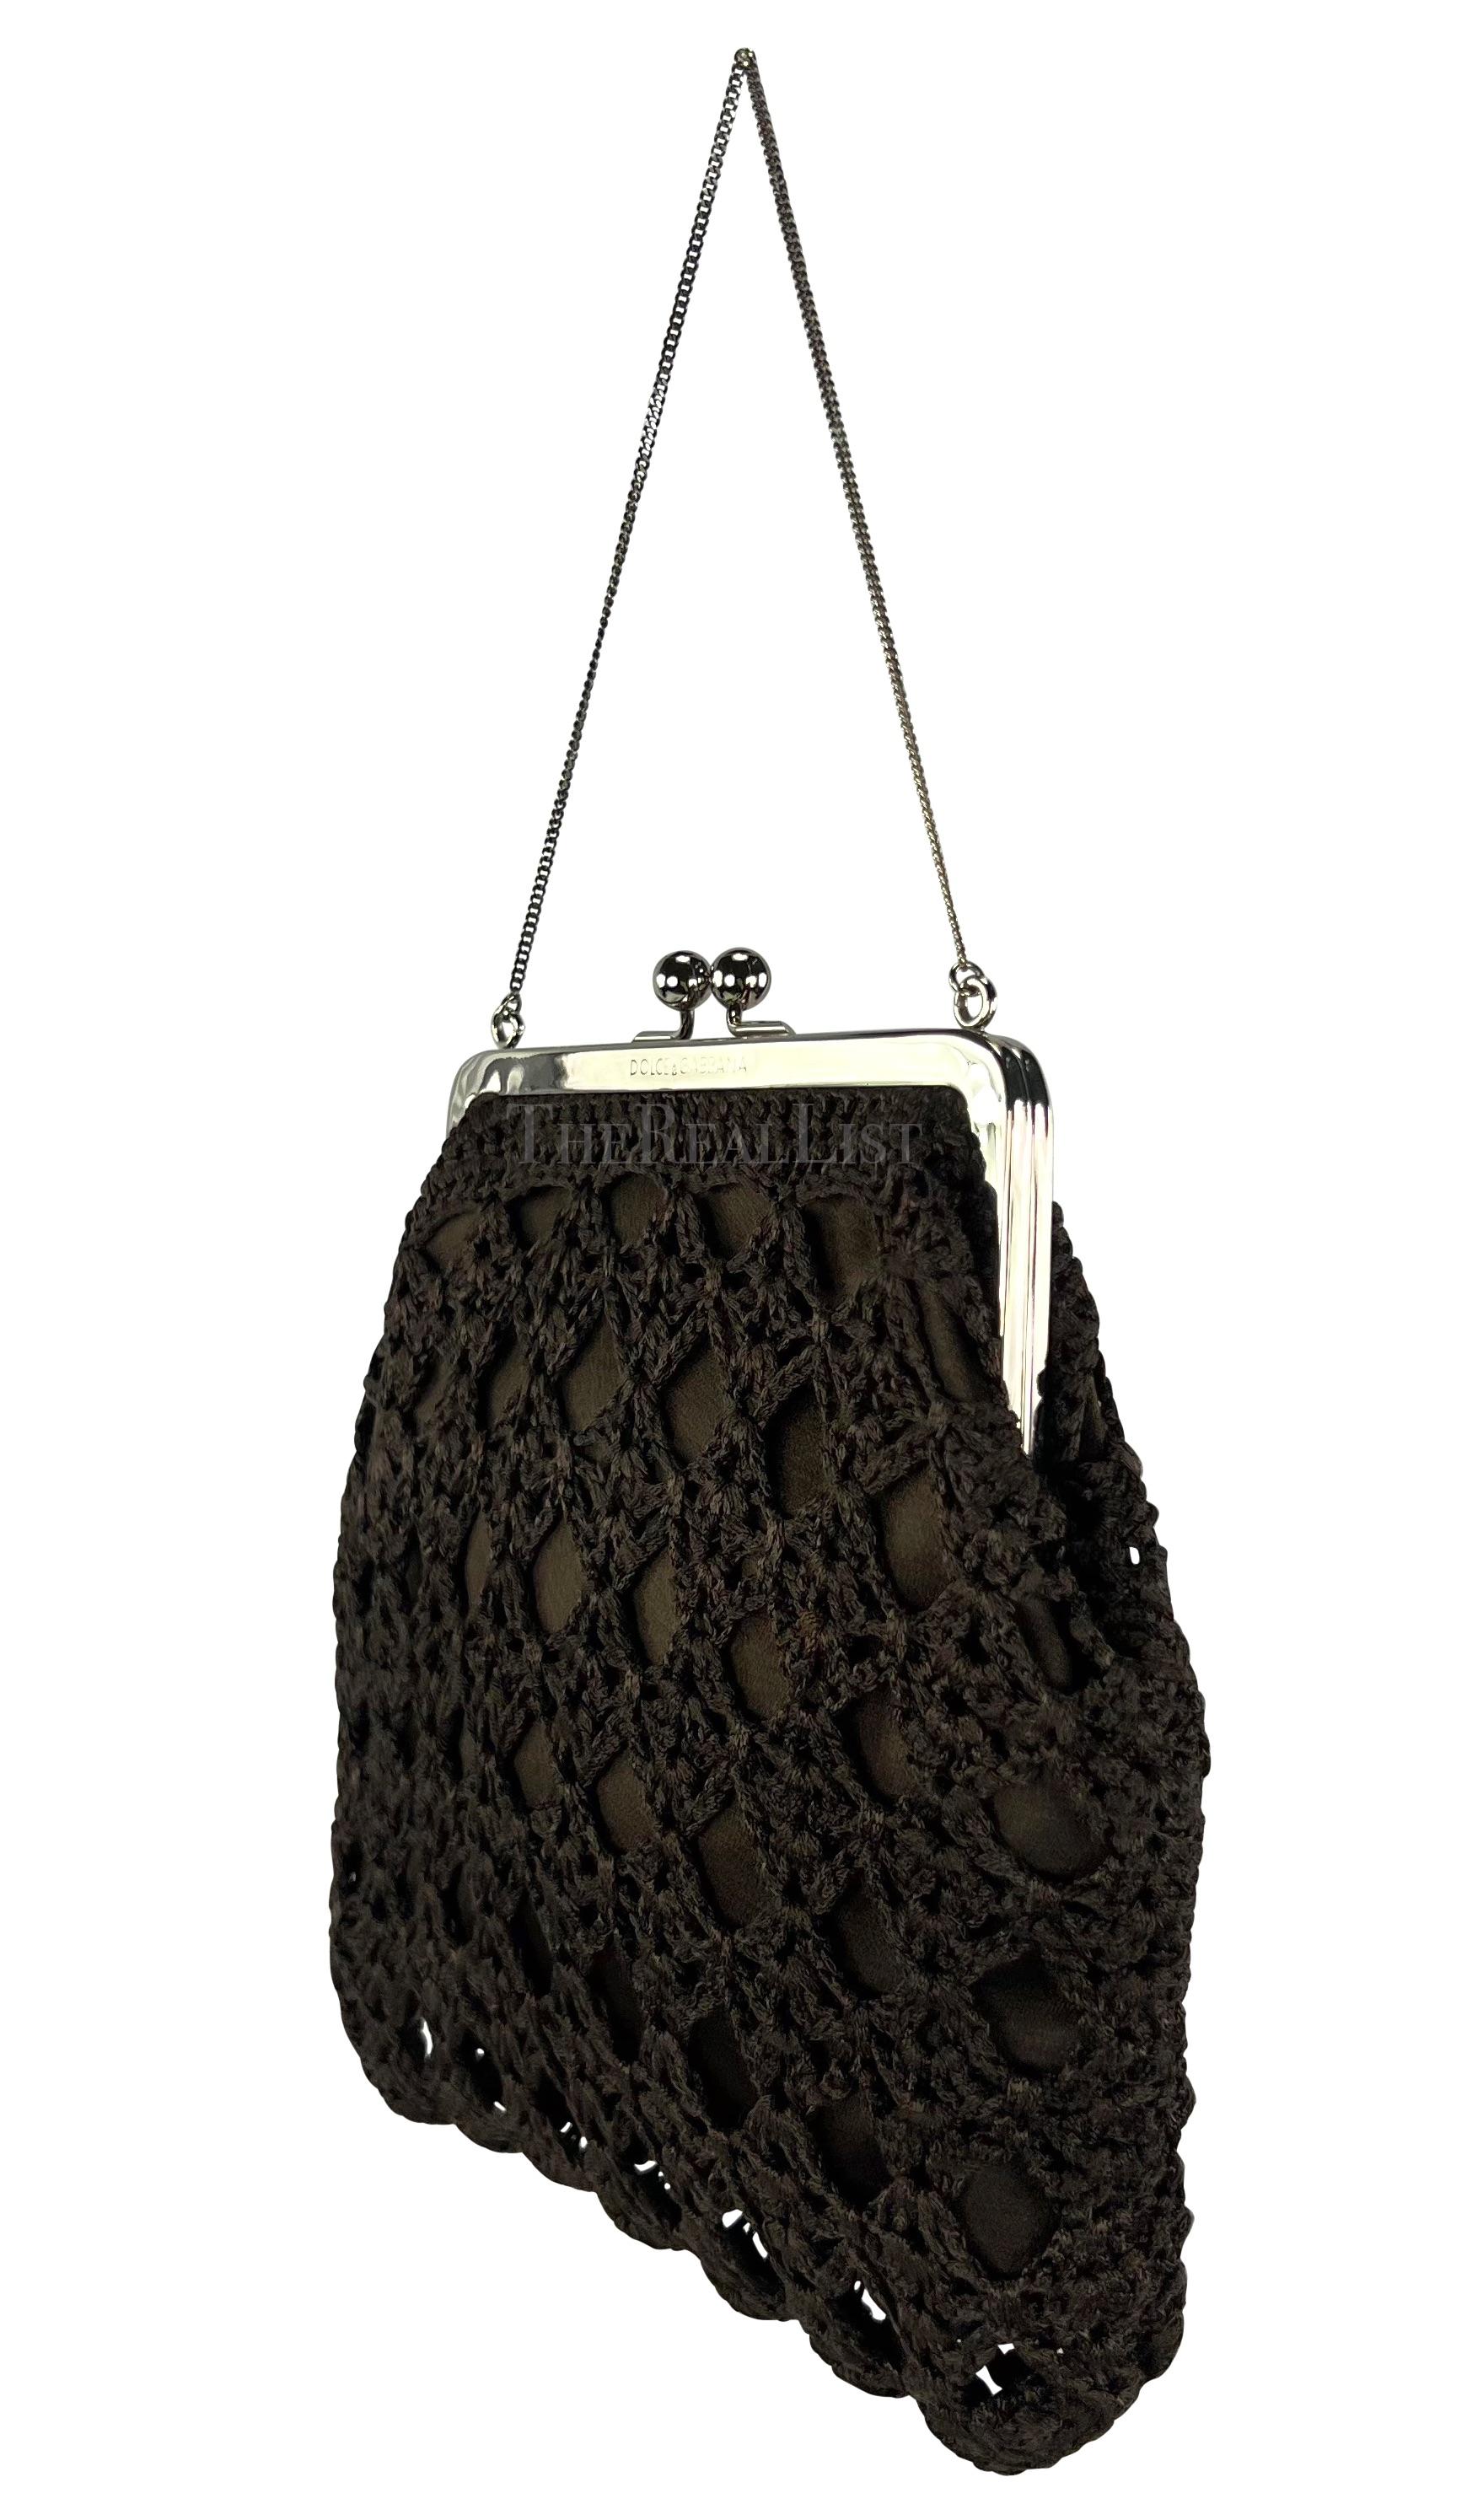 S/S 1997 Dolce & Gabbana Bown Crochet Clam Closure Mini Evening Bag In Excellent Condition For Sale In West Hollywood, CA